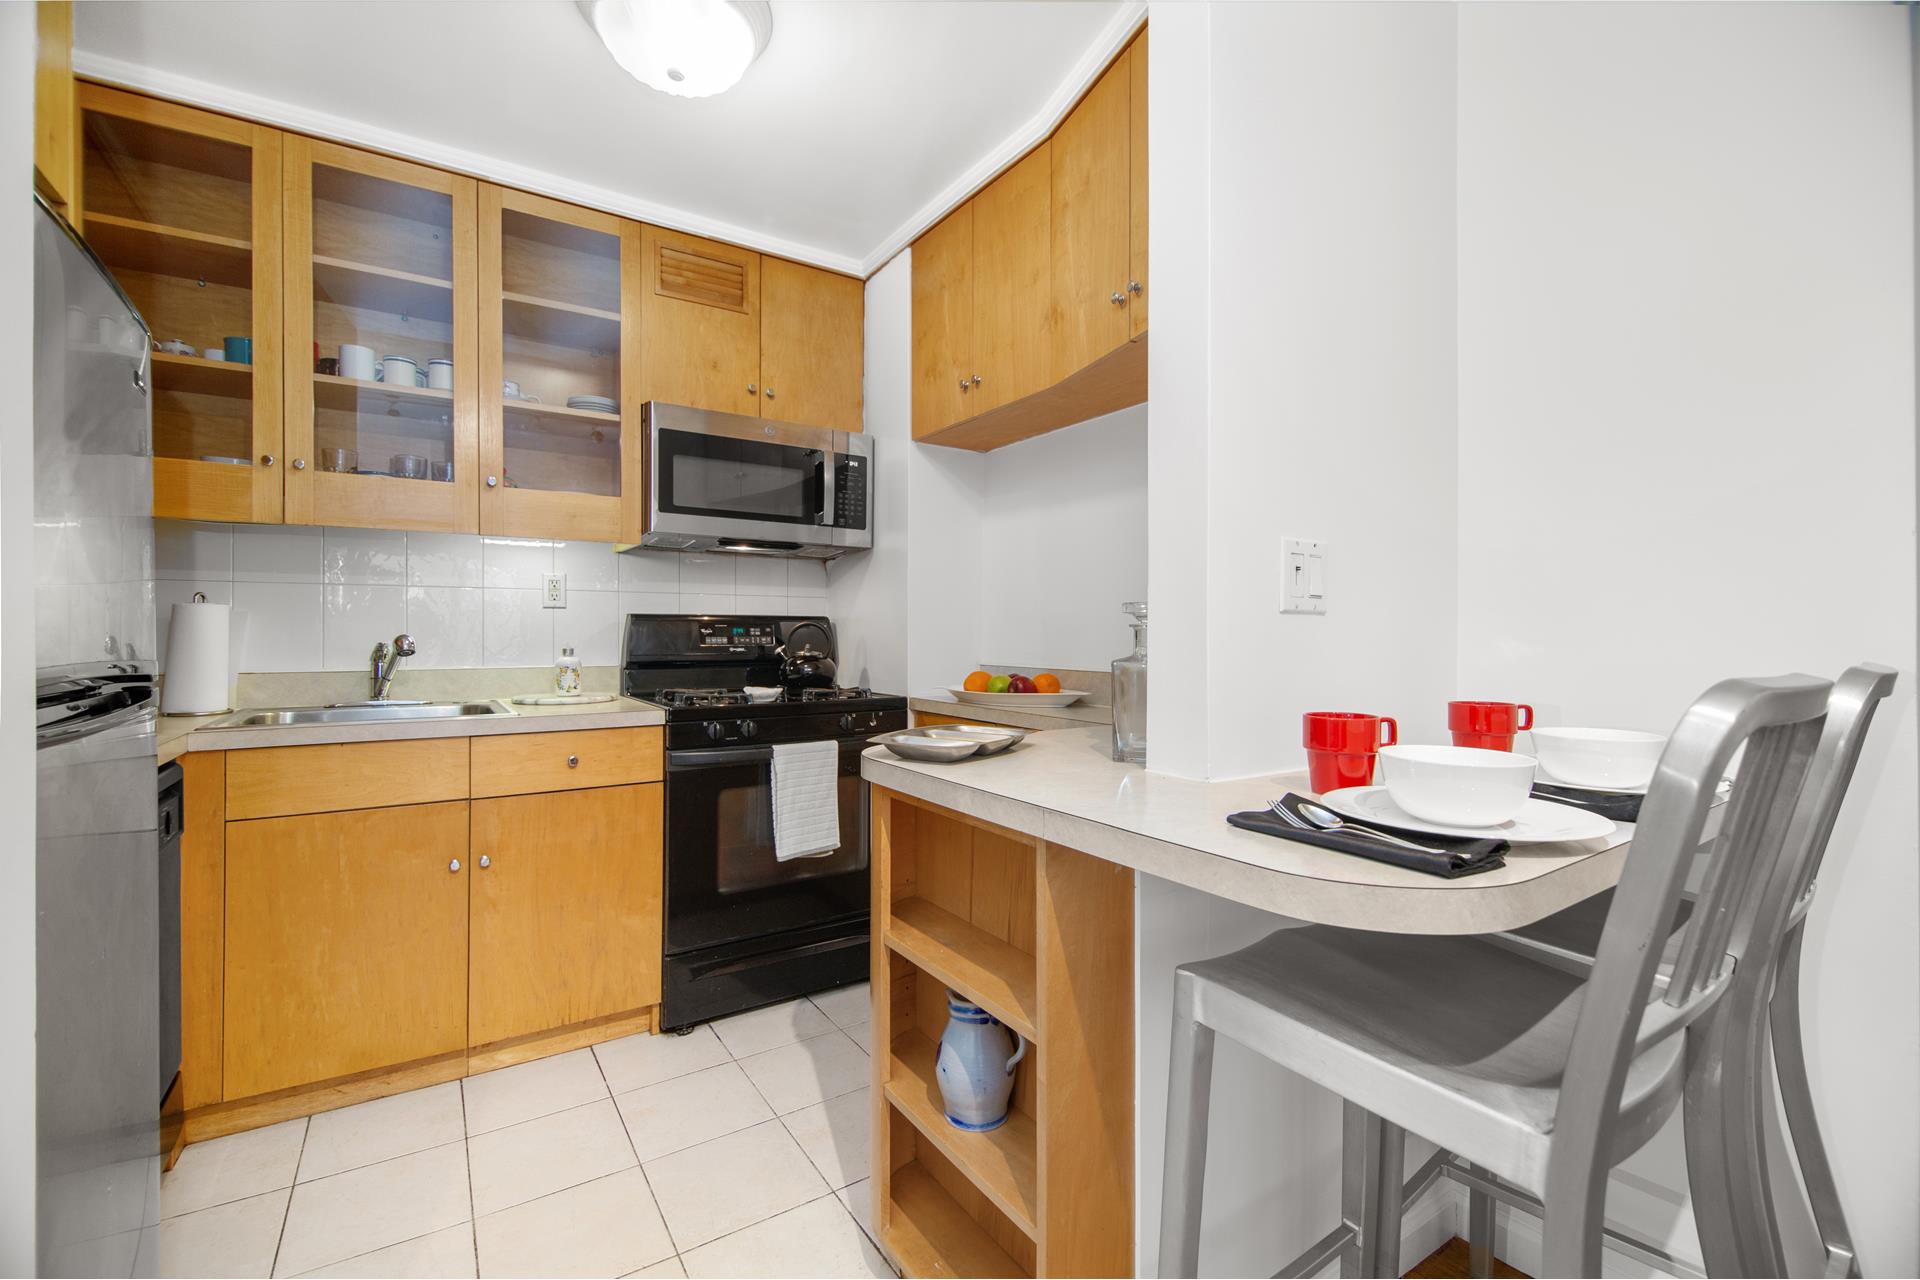 301 East 69th Street 5G, Lenox Hill, Upper East Side, NYC - 2 Bedrooms  
1 Bathrooms  
4 Rooms - 